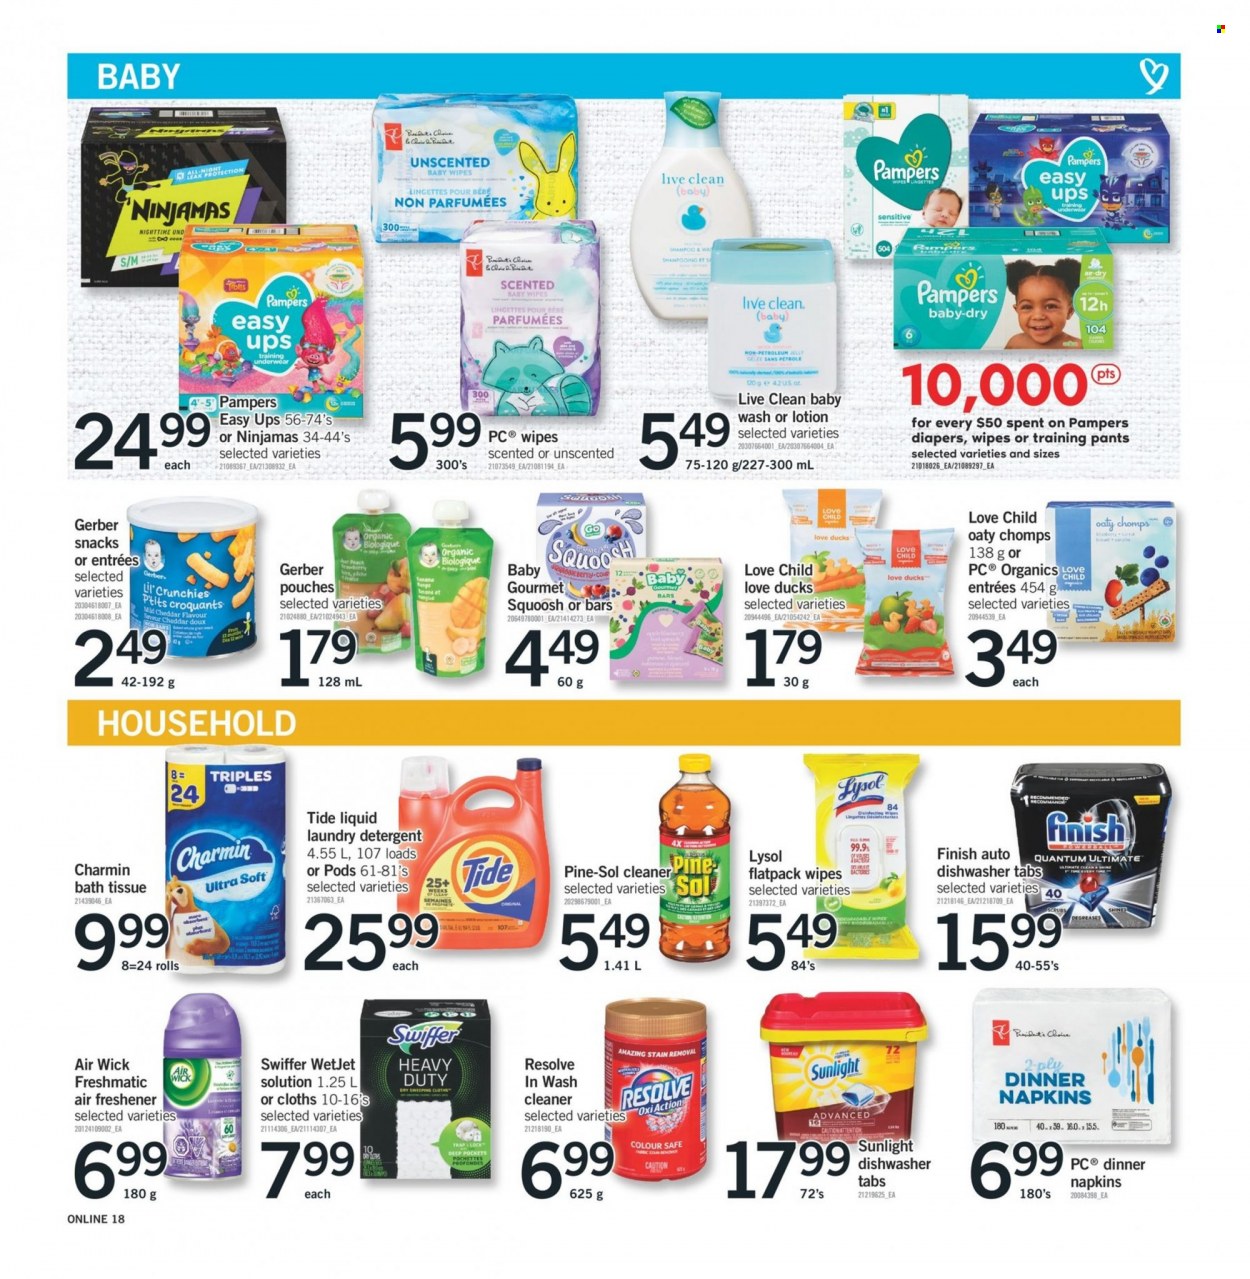 thumbnail - Fortinos Flyer - March 16, 2023 - March 22, 2023 - Sales products - chair, cheddar, snack, Gerber, Lil' Crunchies, baby food pouch, wipes, Pampers, pants, baby wipes, nappies, napkins, baby pants, petroleum jelly, bath tissue, Charmin, cleaner, stain remover, Lysol, Pine-Sol, Swiffer, Tide, laundry detergent, Sunlight, body lotion, WetJet, air freshener, Air Wick, dishwasher, underwear, detergent. Page 16.